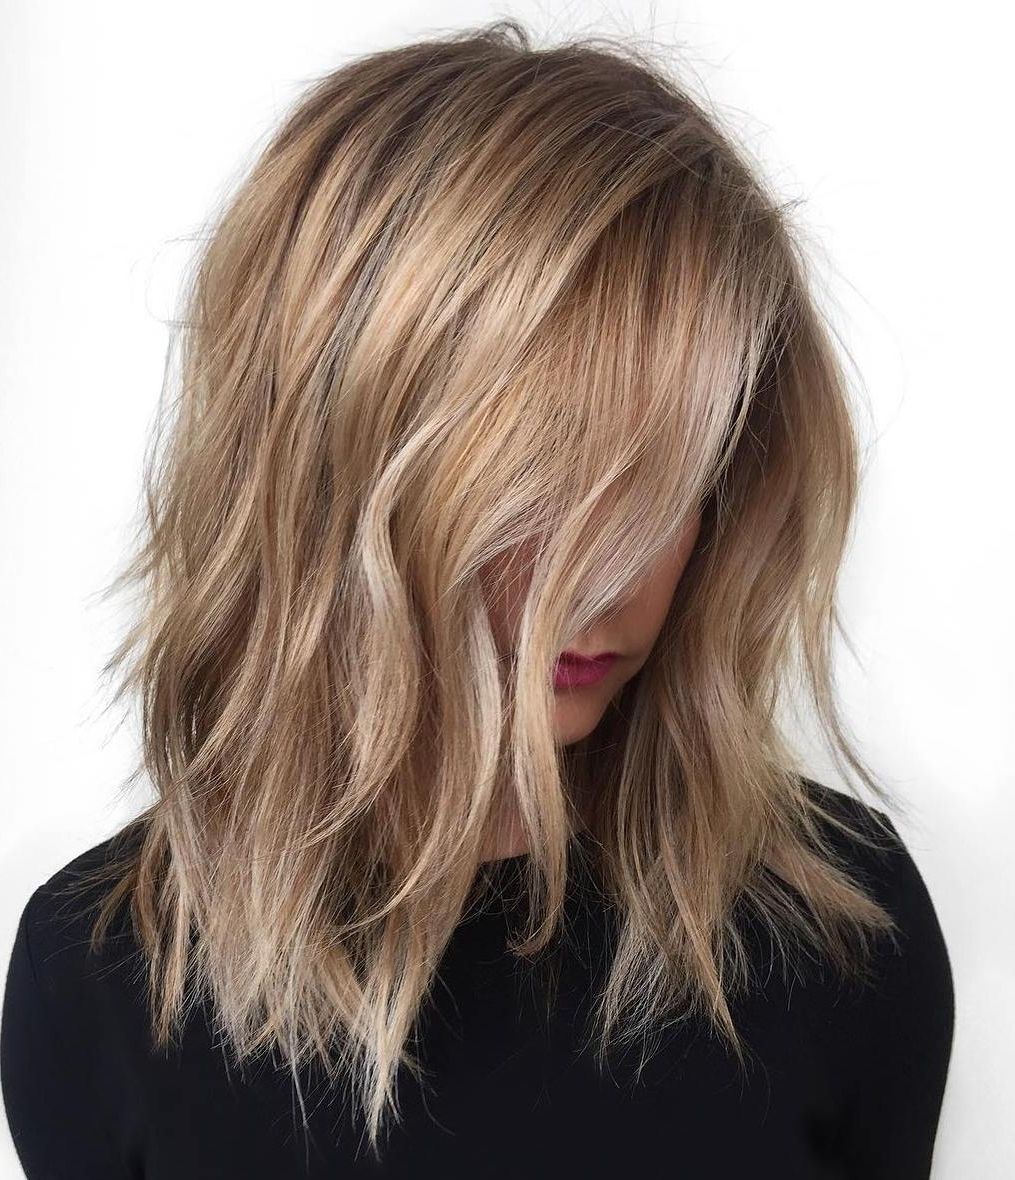 40 Styles With Medium Blonde Hair For Major Inspiration With Recent Blunt Cut White Gold Lob Blonde Hairstyles (Gallery 19 of 20)